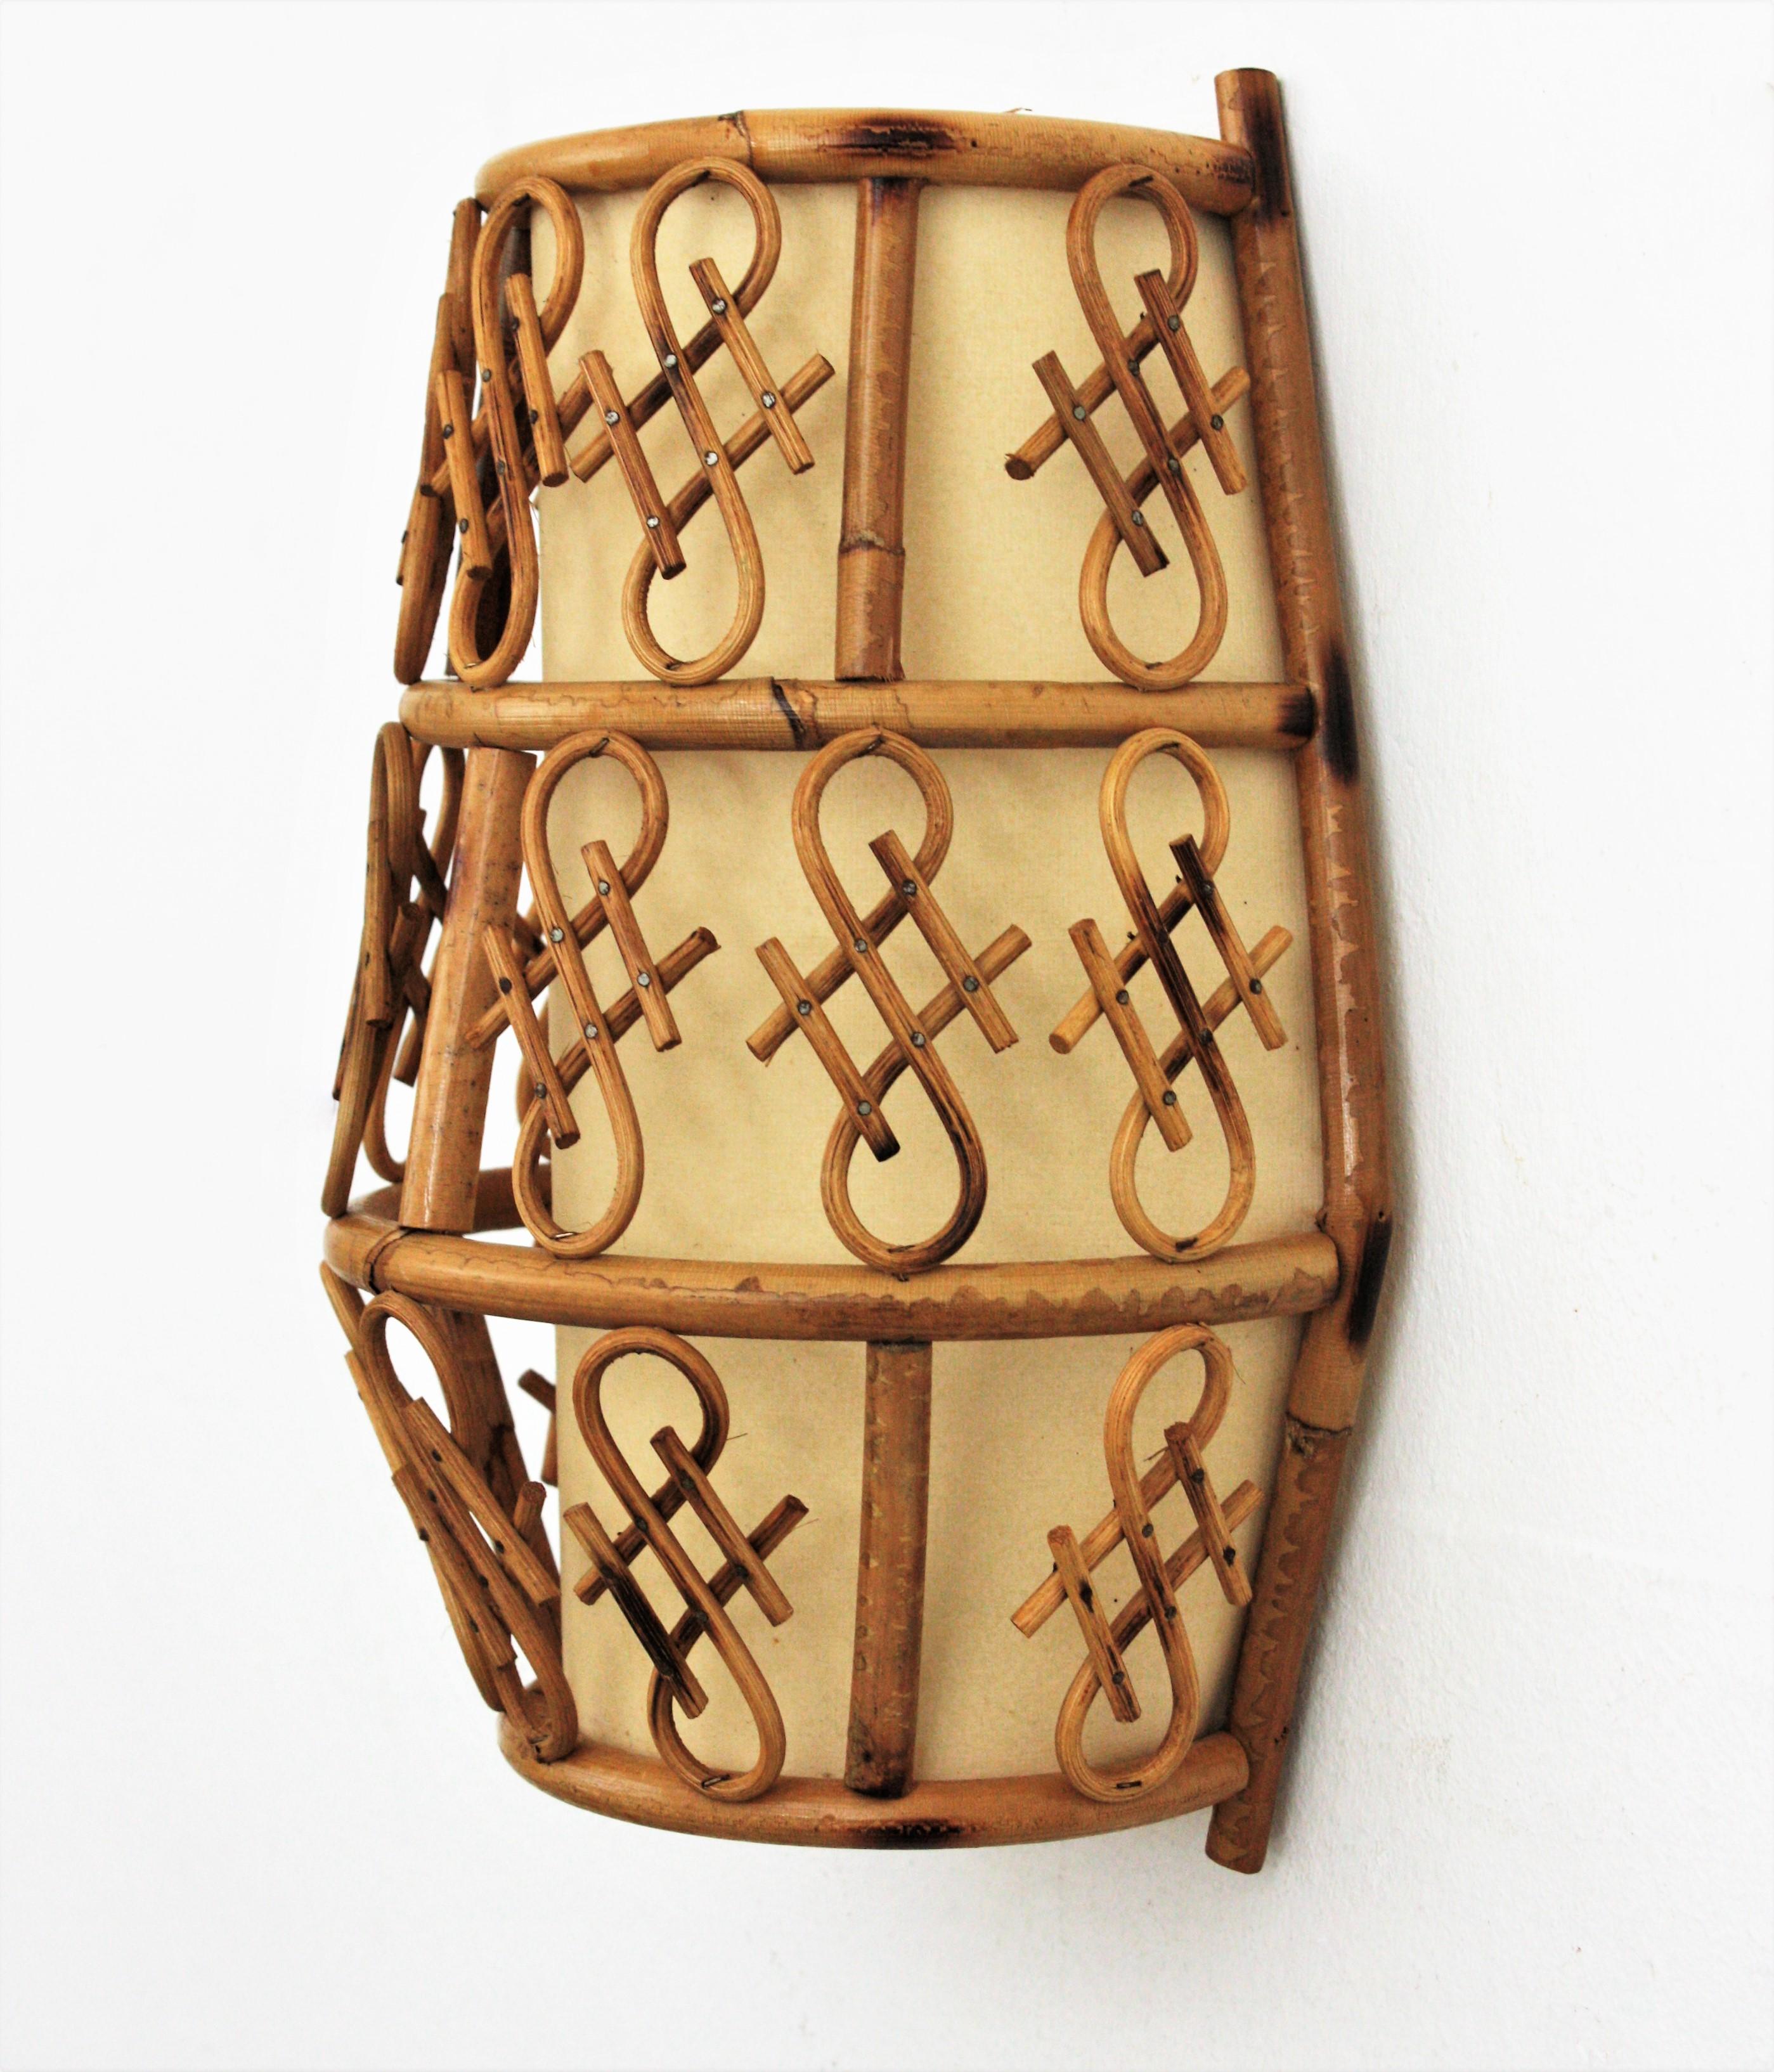 Oriental Inspired Rattan Wall Light
Half cylinder trapezoid bamboo rattan wall light with chinoiserie details, France, 1960s.
This oriental inspired light fixture is made with a rattan structure accented by chinoiserie decorations in rattan.  It has